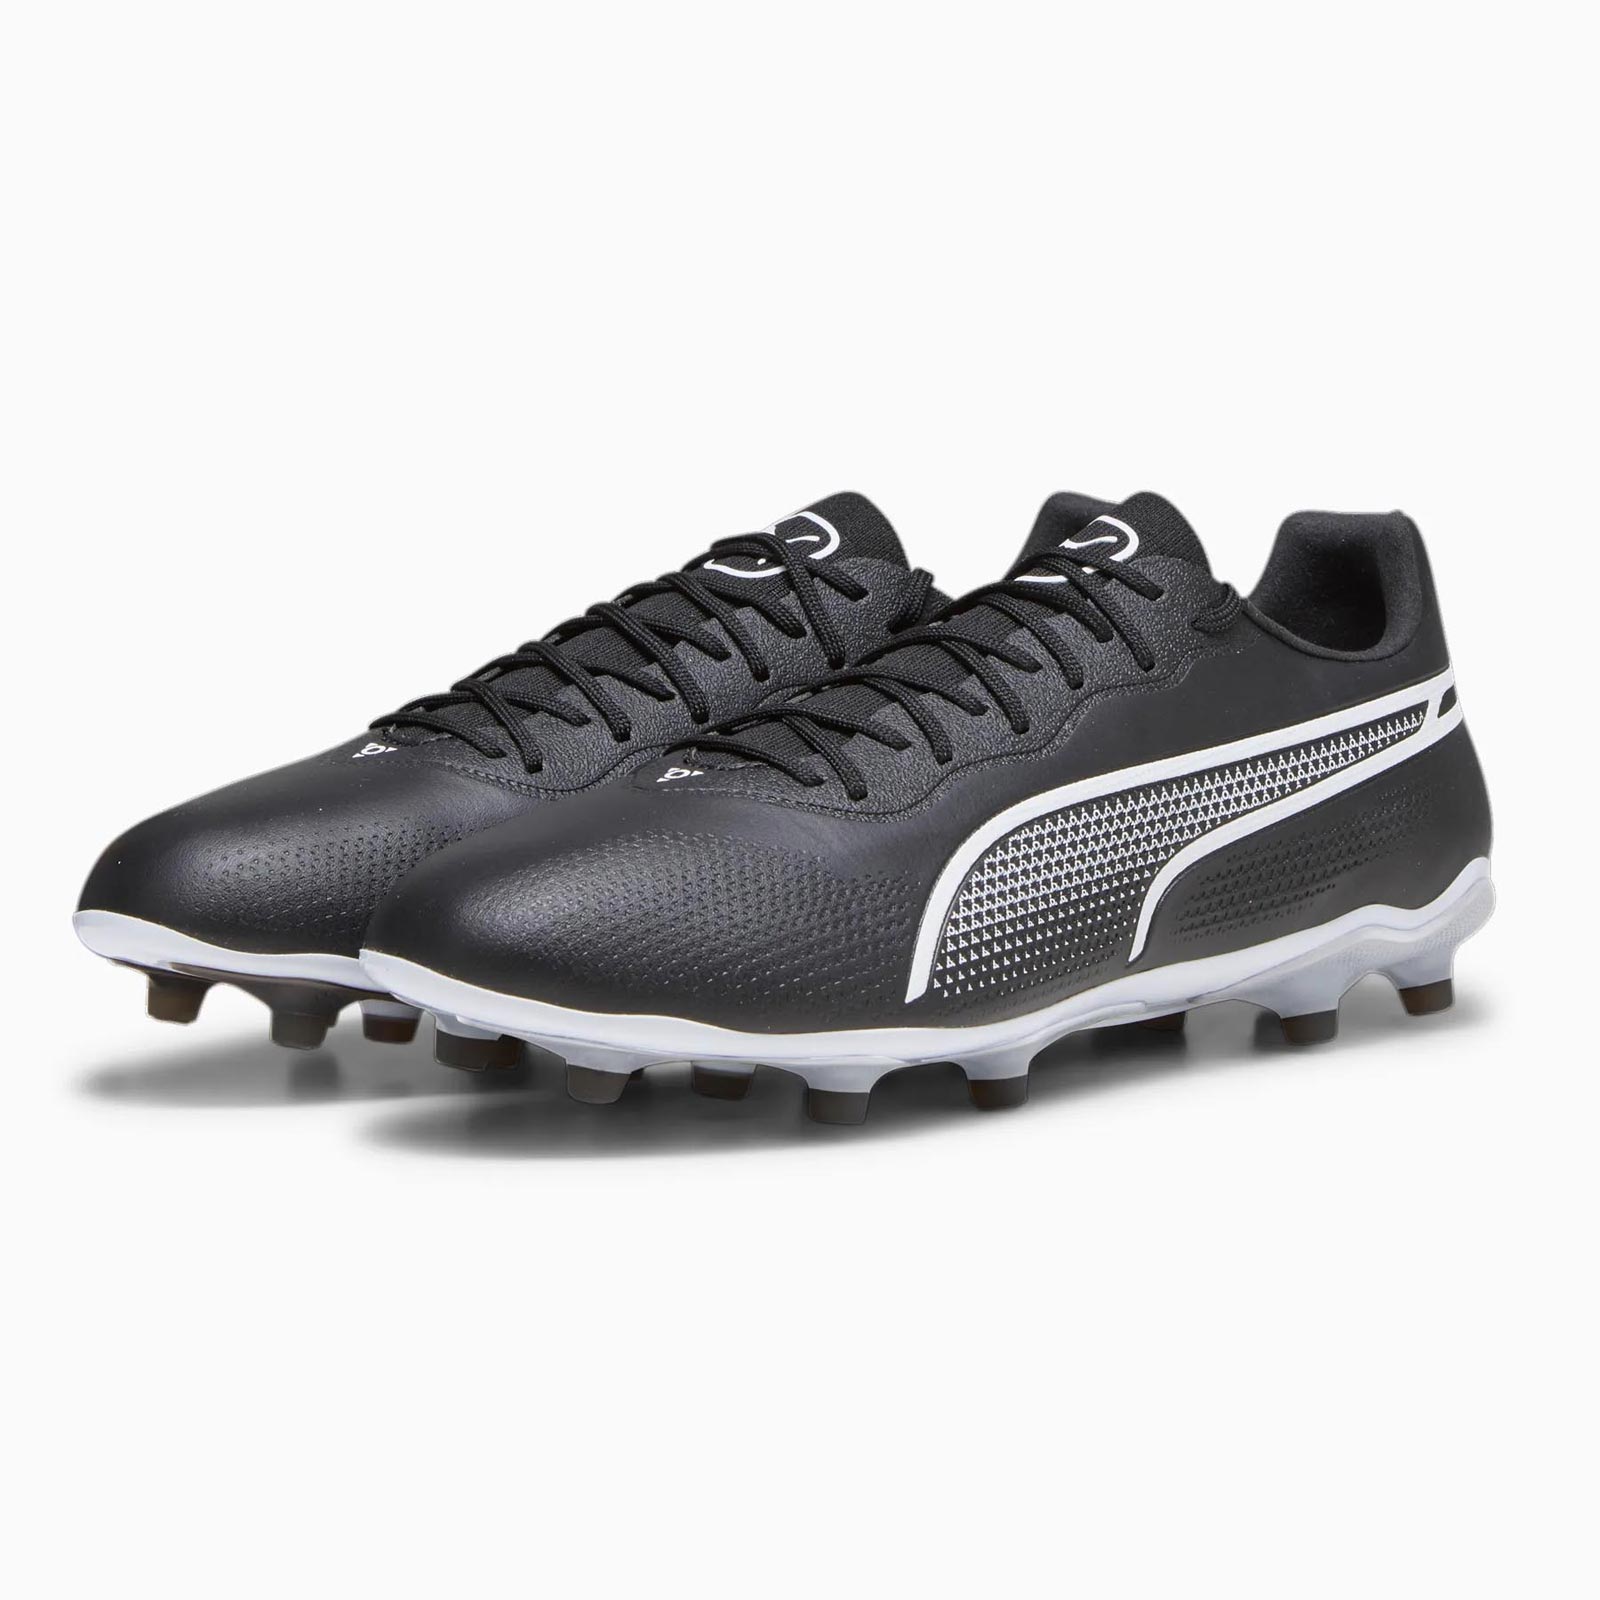 PUMA KING PRO FIRM-GROUND FOOTBALL BOOTS